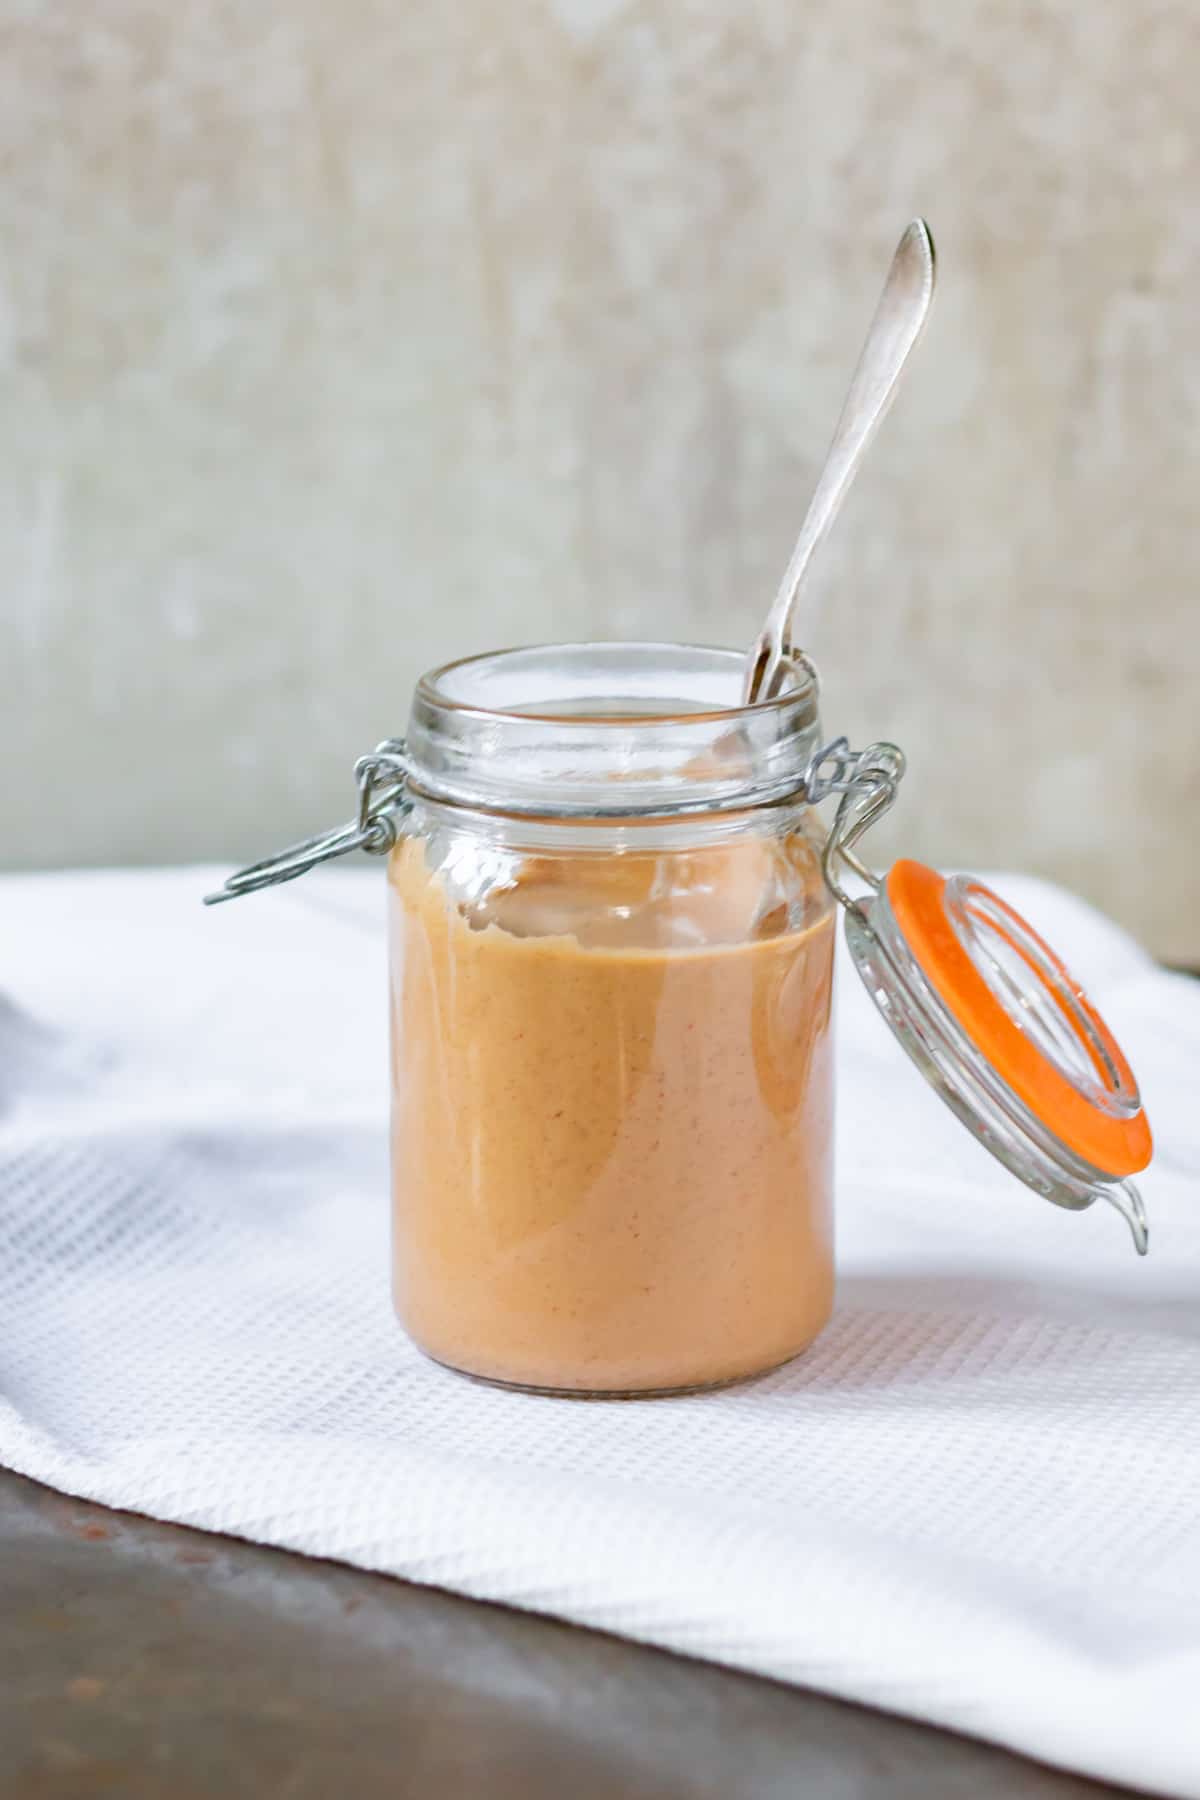 A jar of sauce with a spoon.